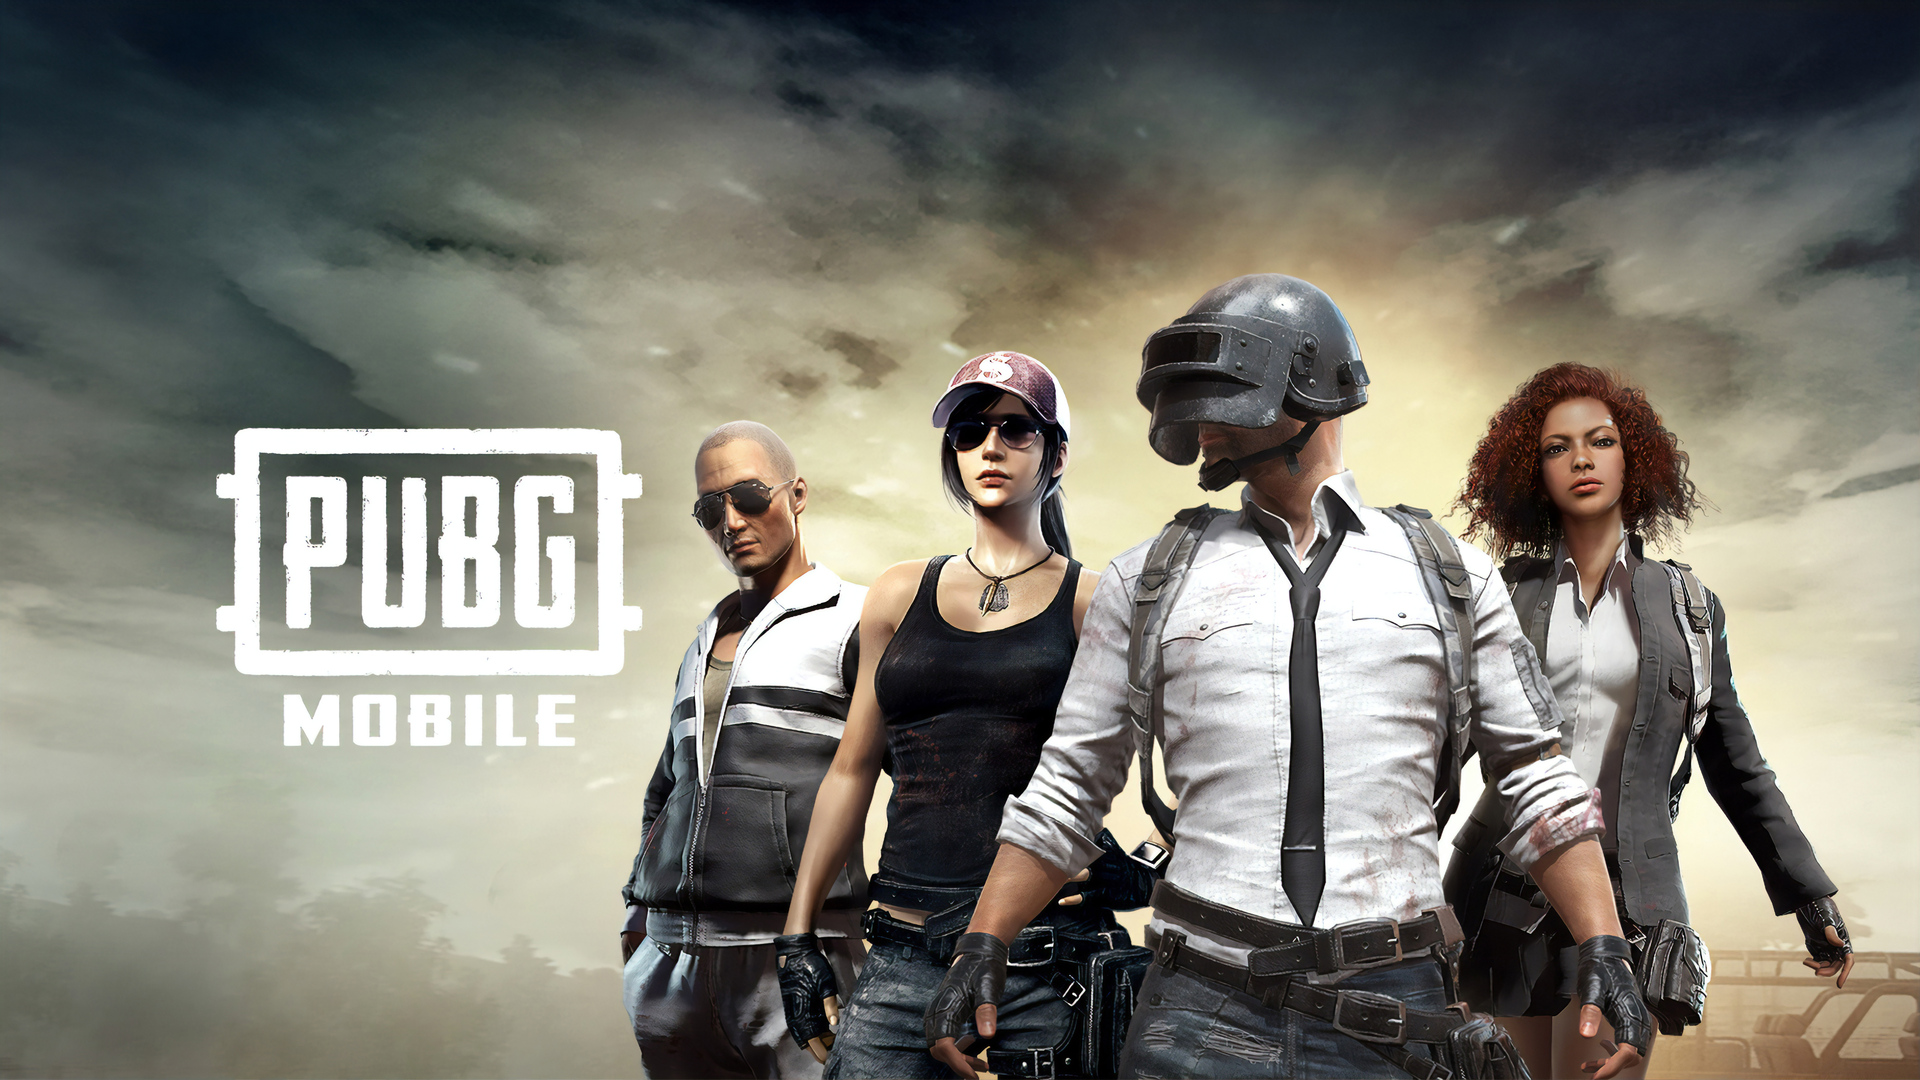 1920x1080 Pubg Mobile 4k Laptop Full HD 1080P HD 4k Wallpapers, Images,  Backgrounds, Photos and Pictures